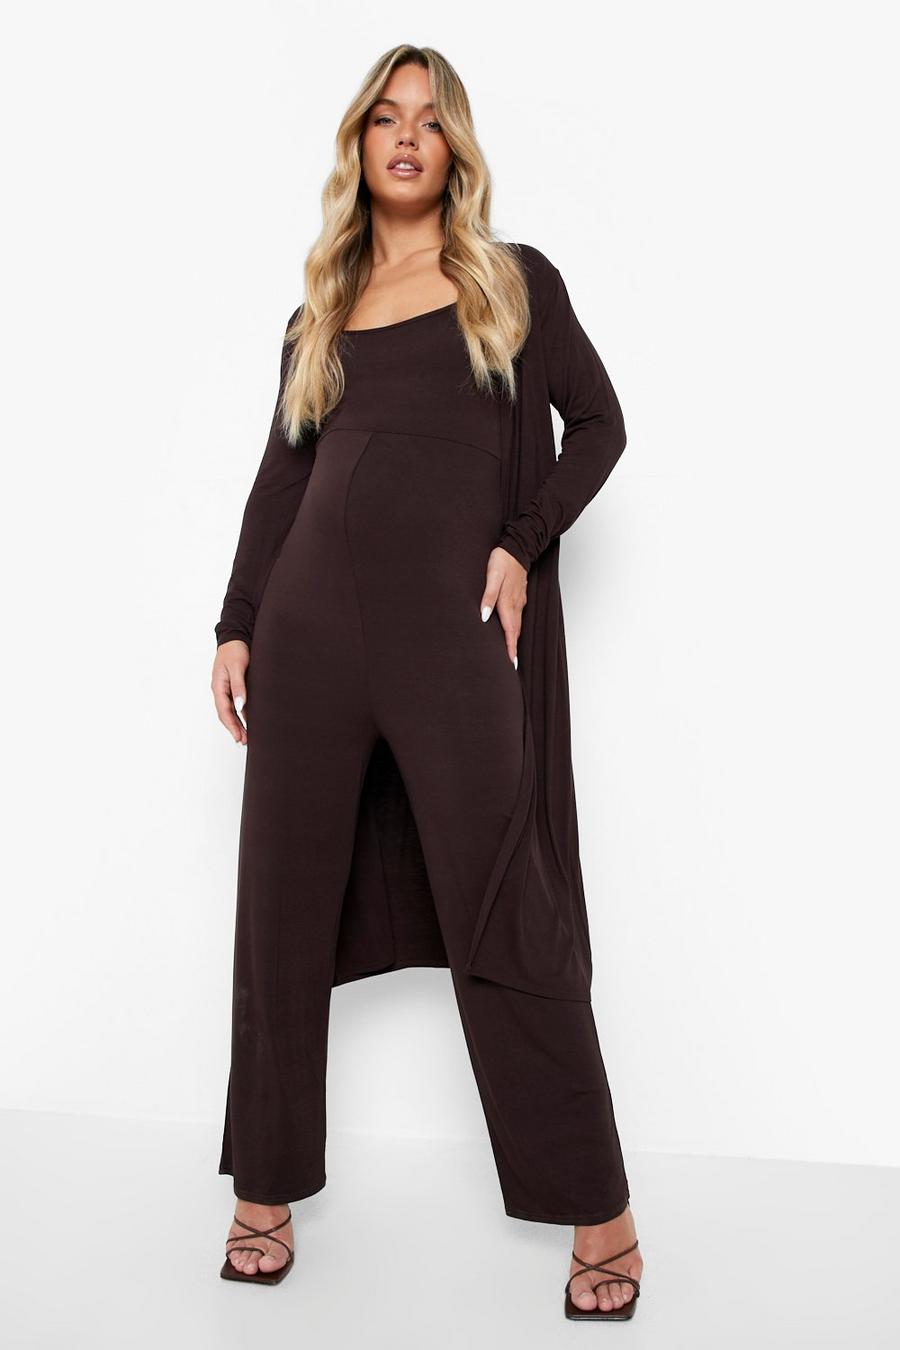 Chocolate brown Maternity Slouchy Jumpsuit And Duster